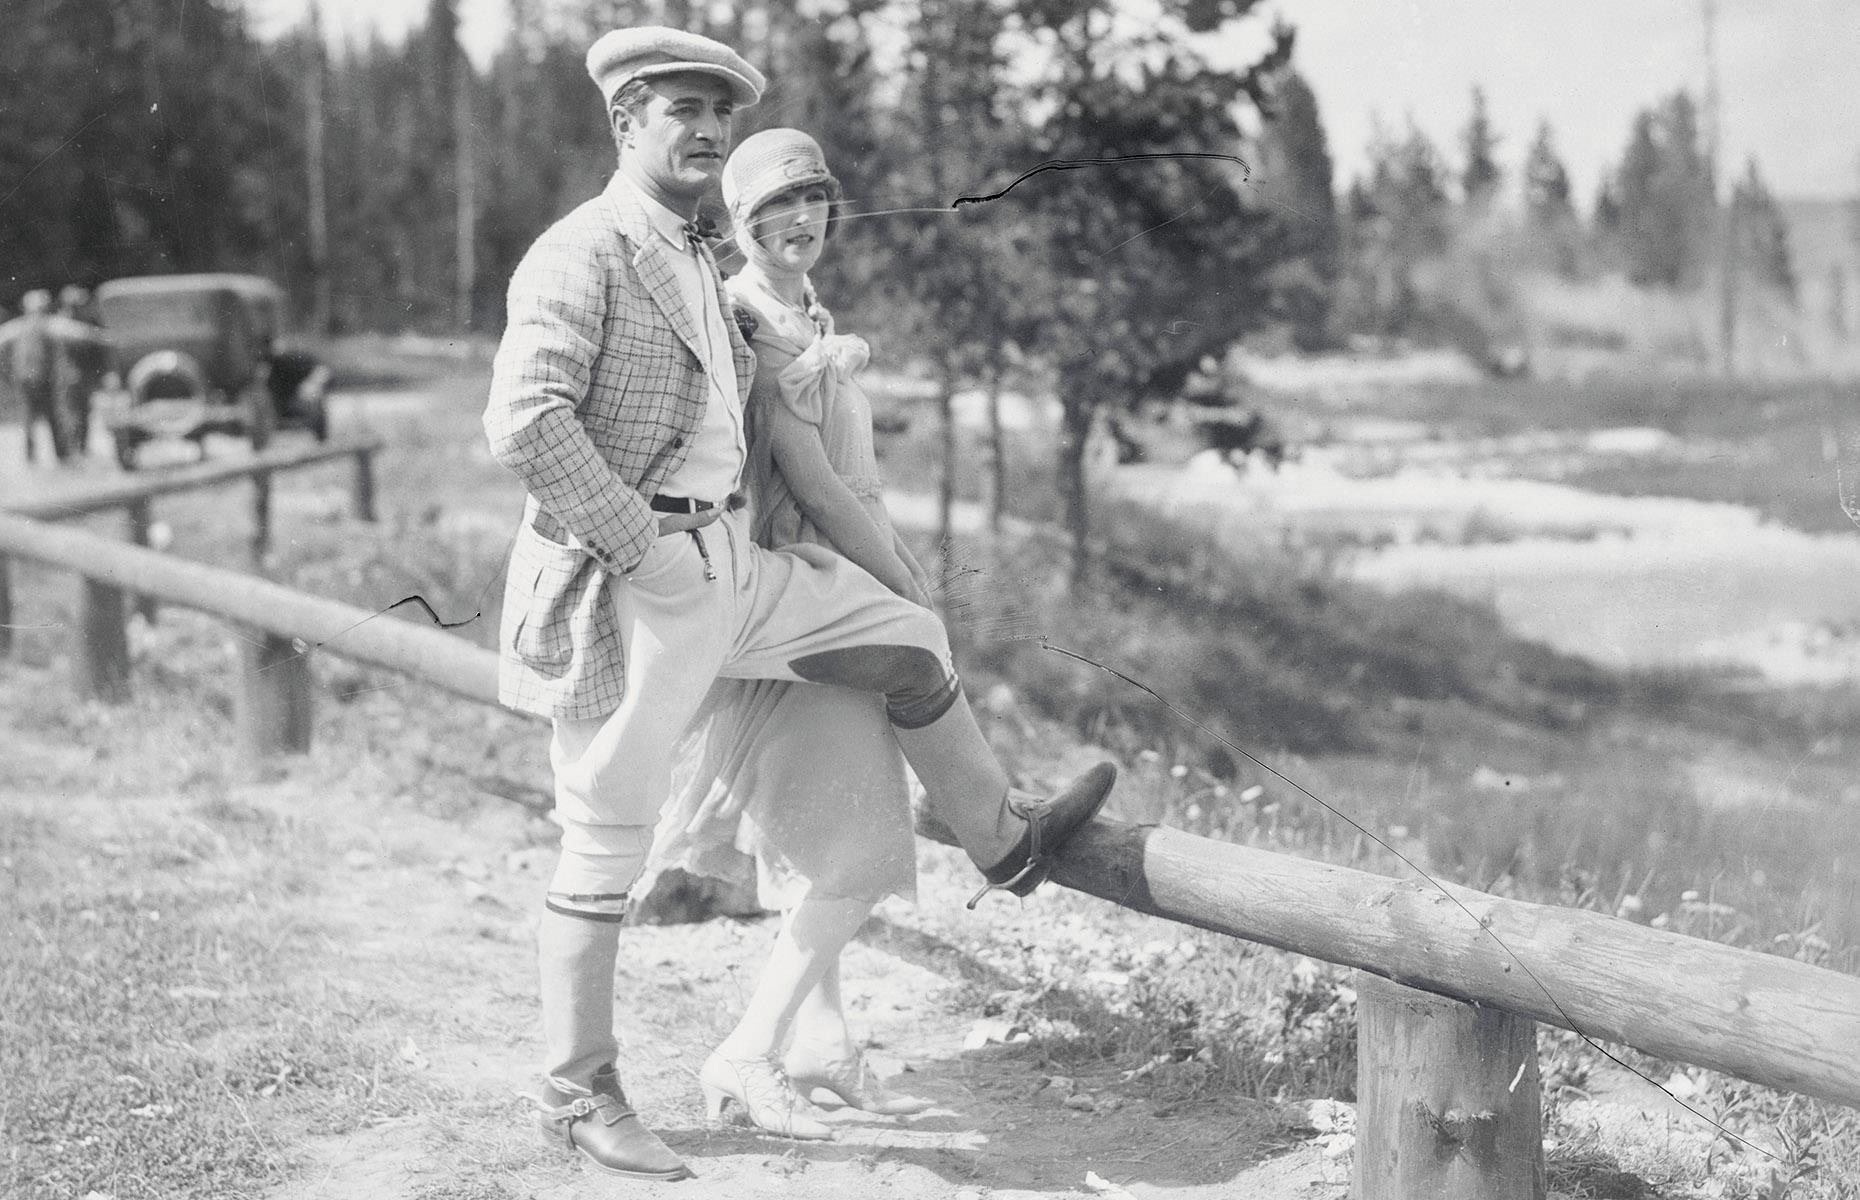 The park soon started attracting a star-spangled list of travelers too. Here, circa 1926, Western movie star Tom Mix is papped in Yellowstone National Park, after filming on location in the Jackson Hole area.